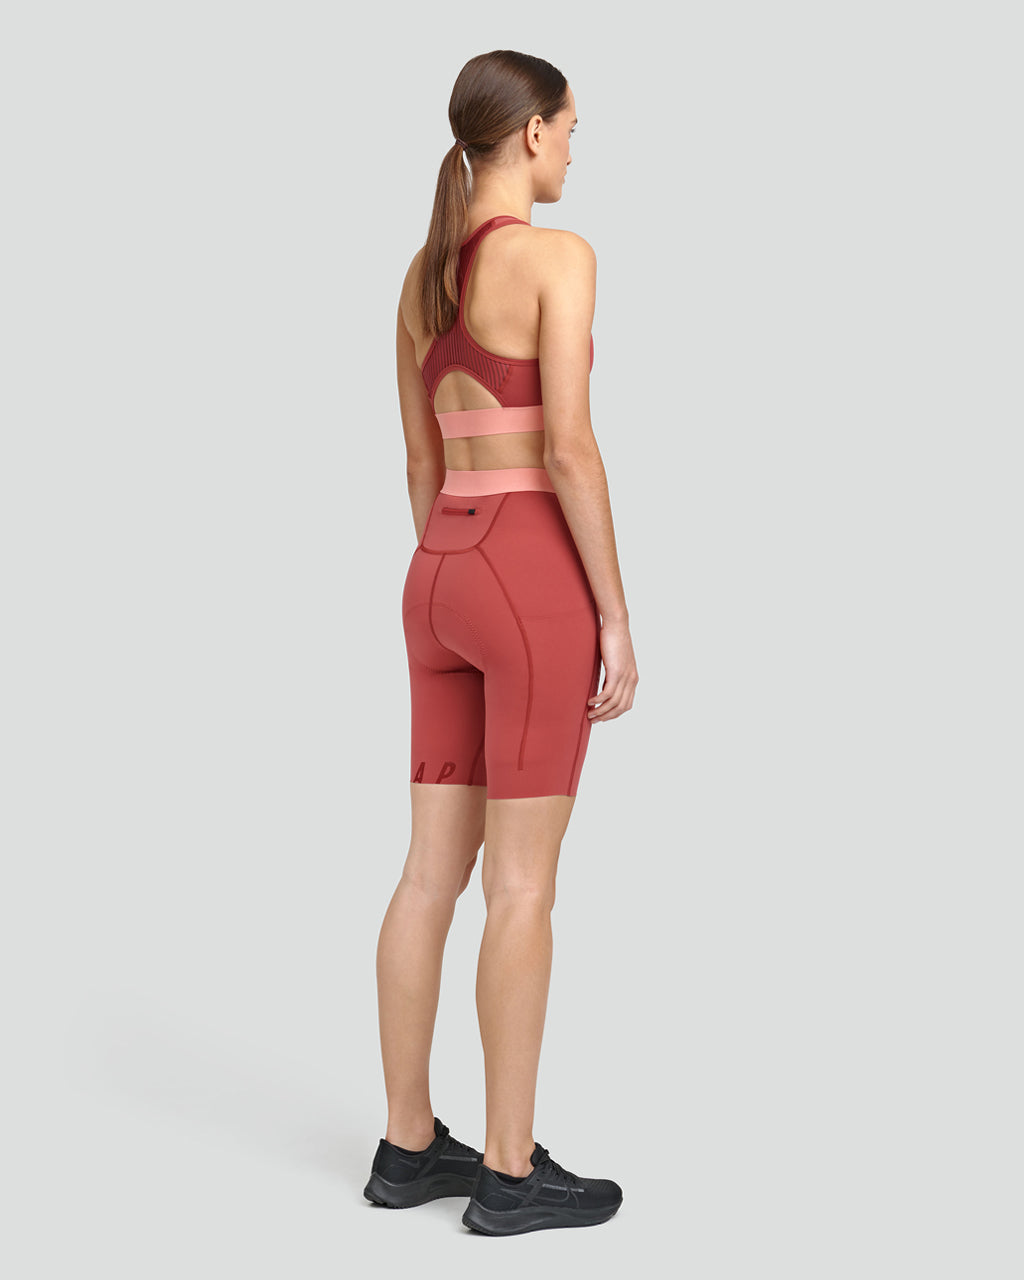 Lululemon Fast And Free Short 10 *Non-Reflective - Cherry Tint